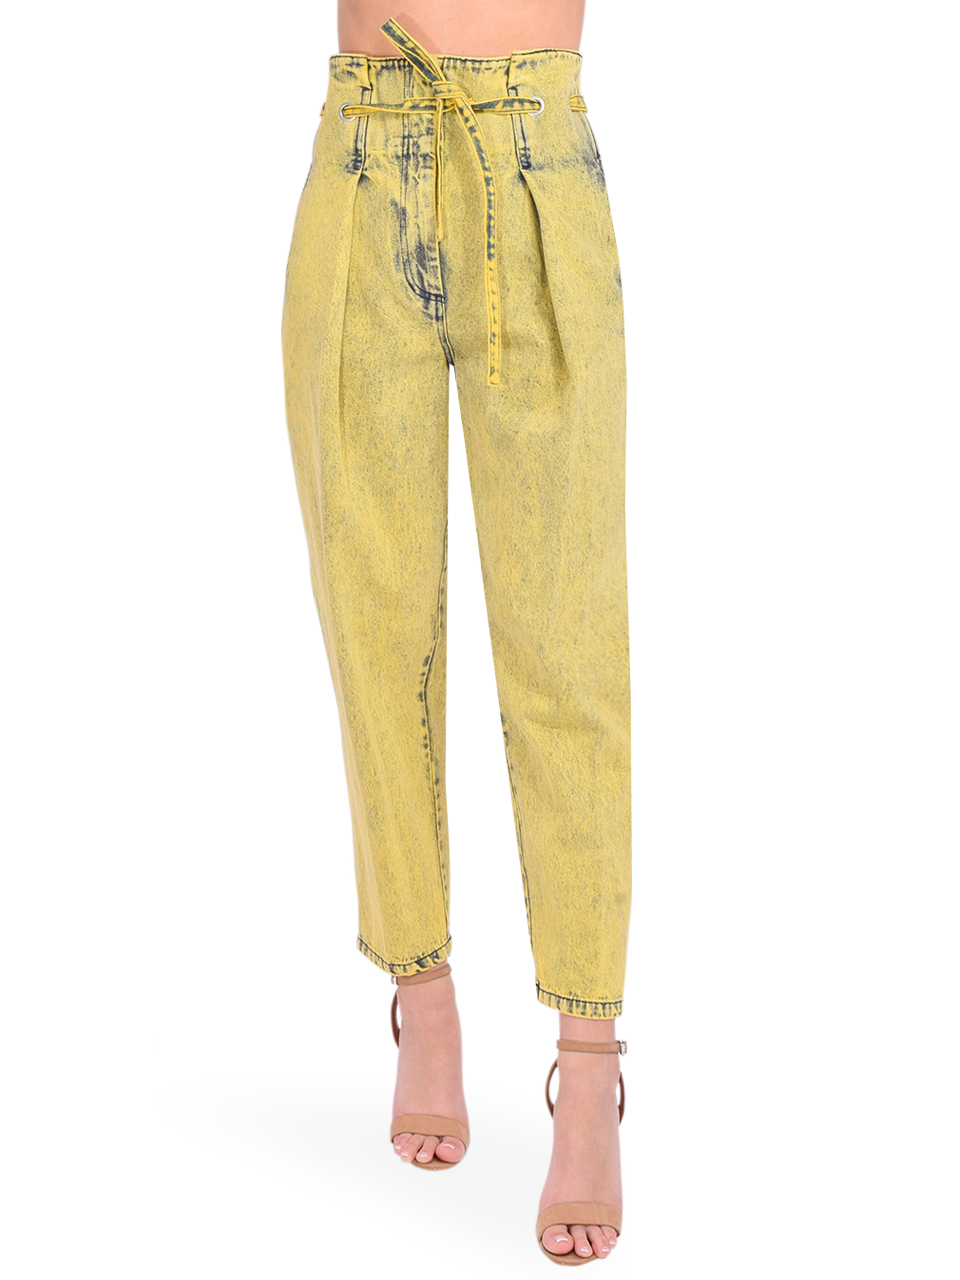 3.1 Phillip Lim Overdyed Denim Origami Pant in Pineapple Front View 